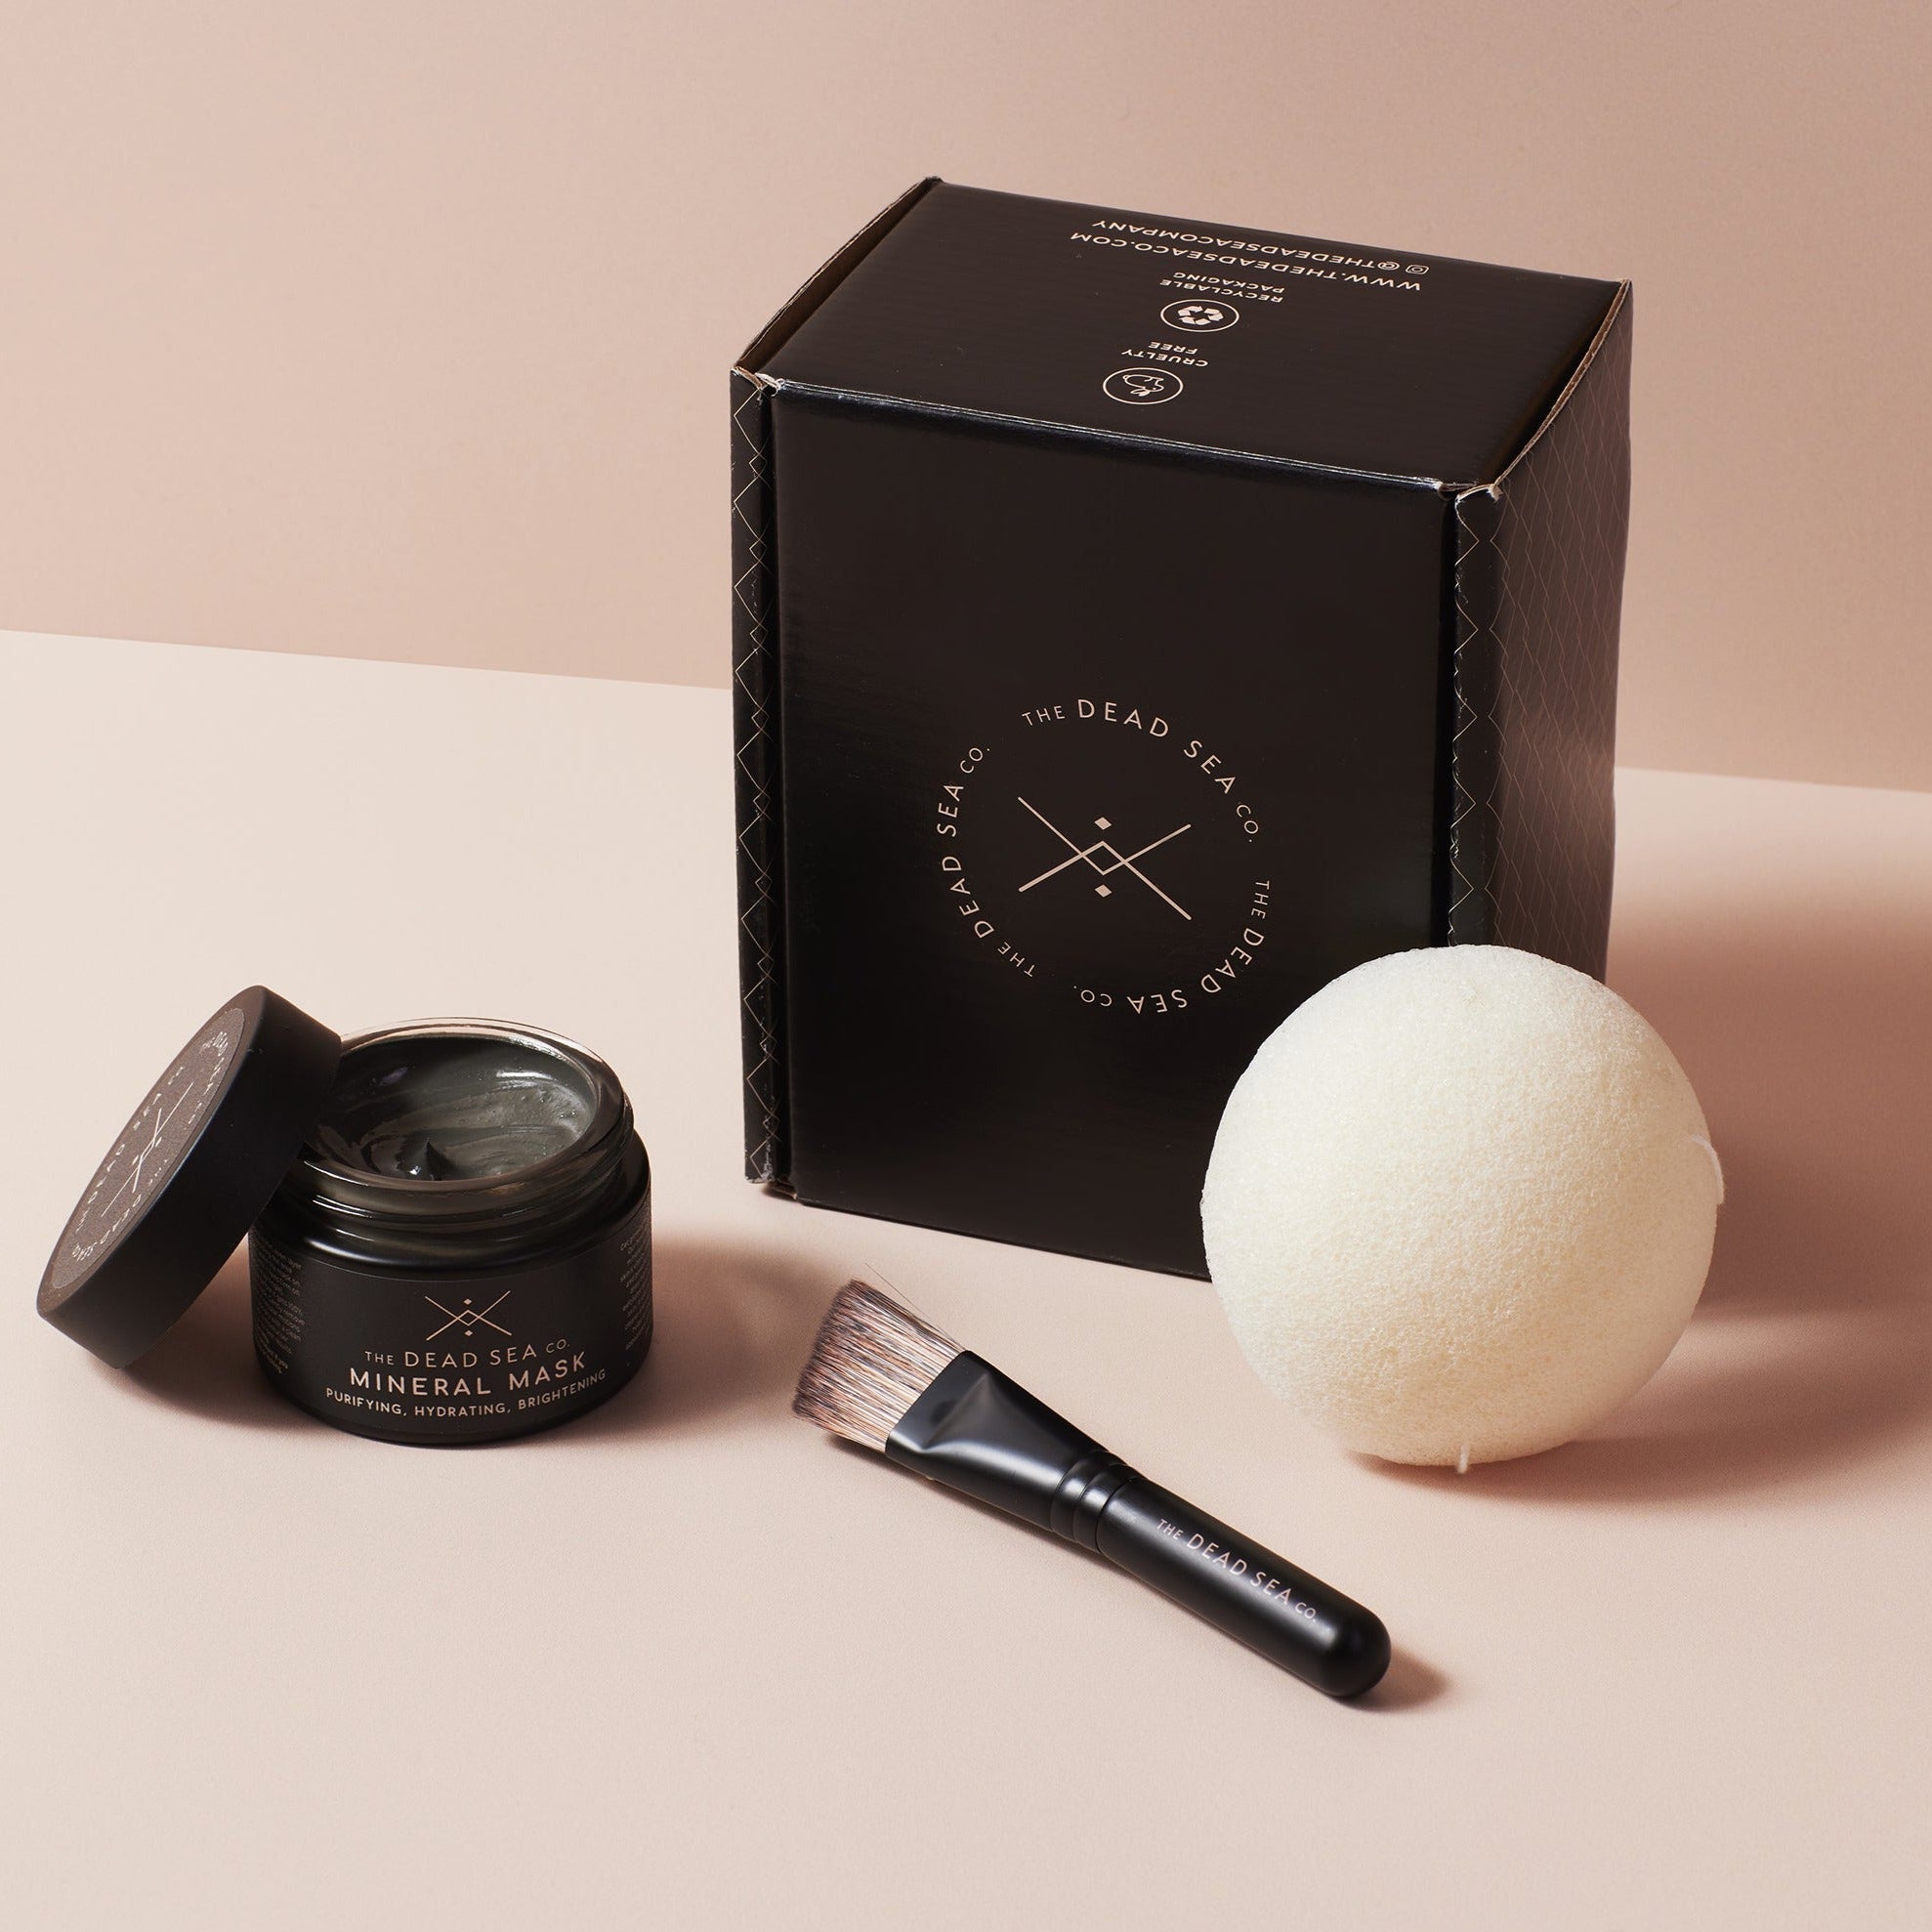 Dead Sea Self-care kit next to an elegant branded gift box